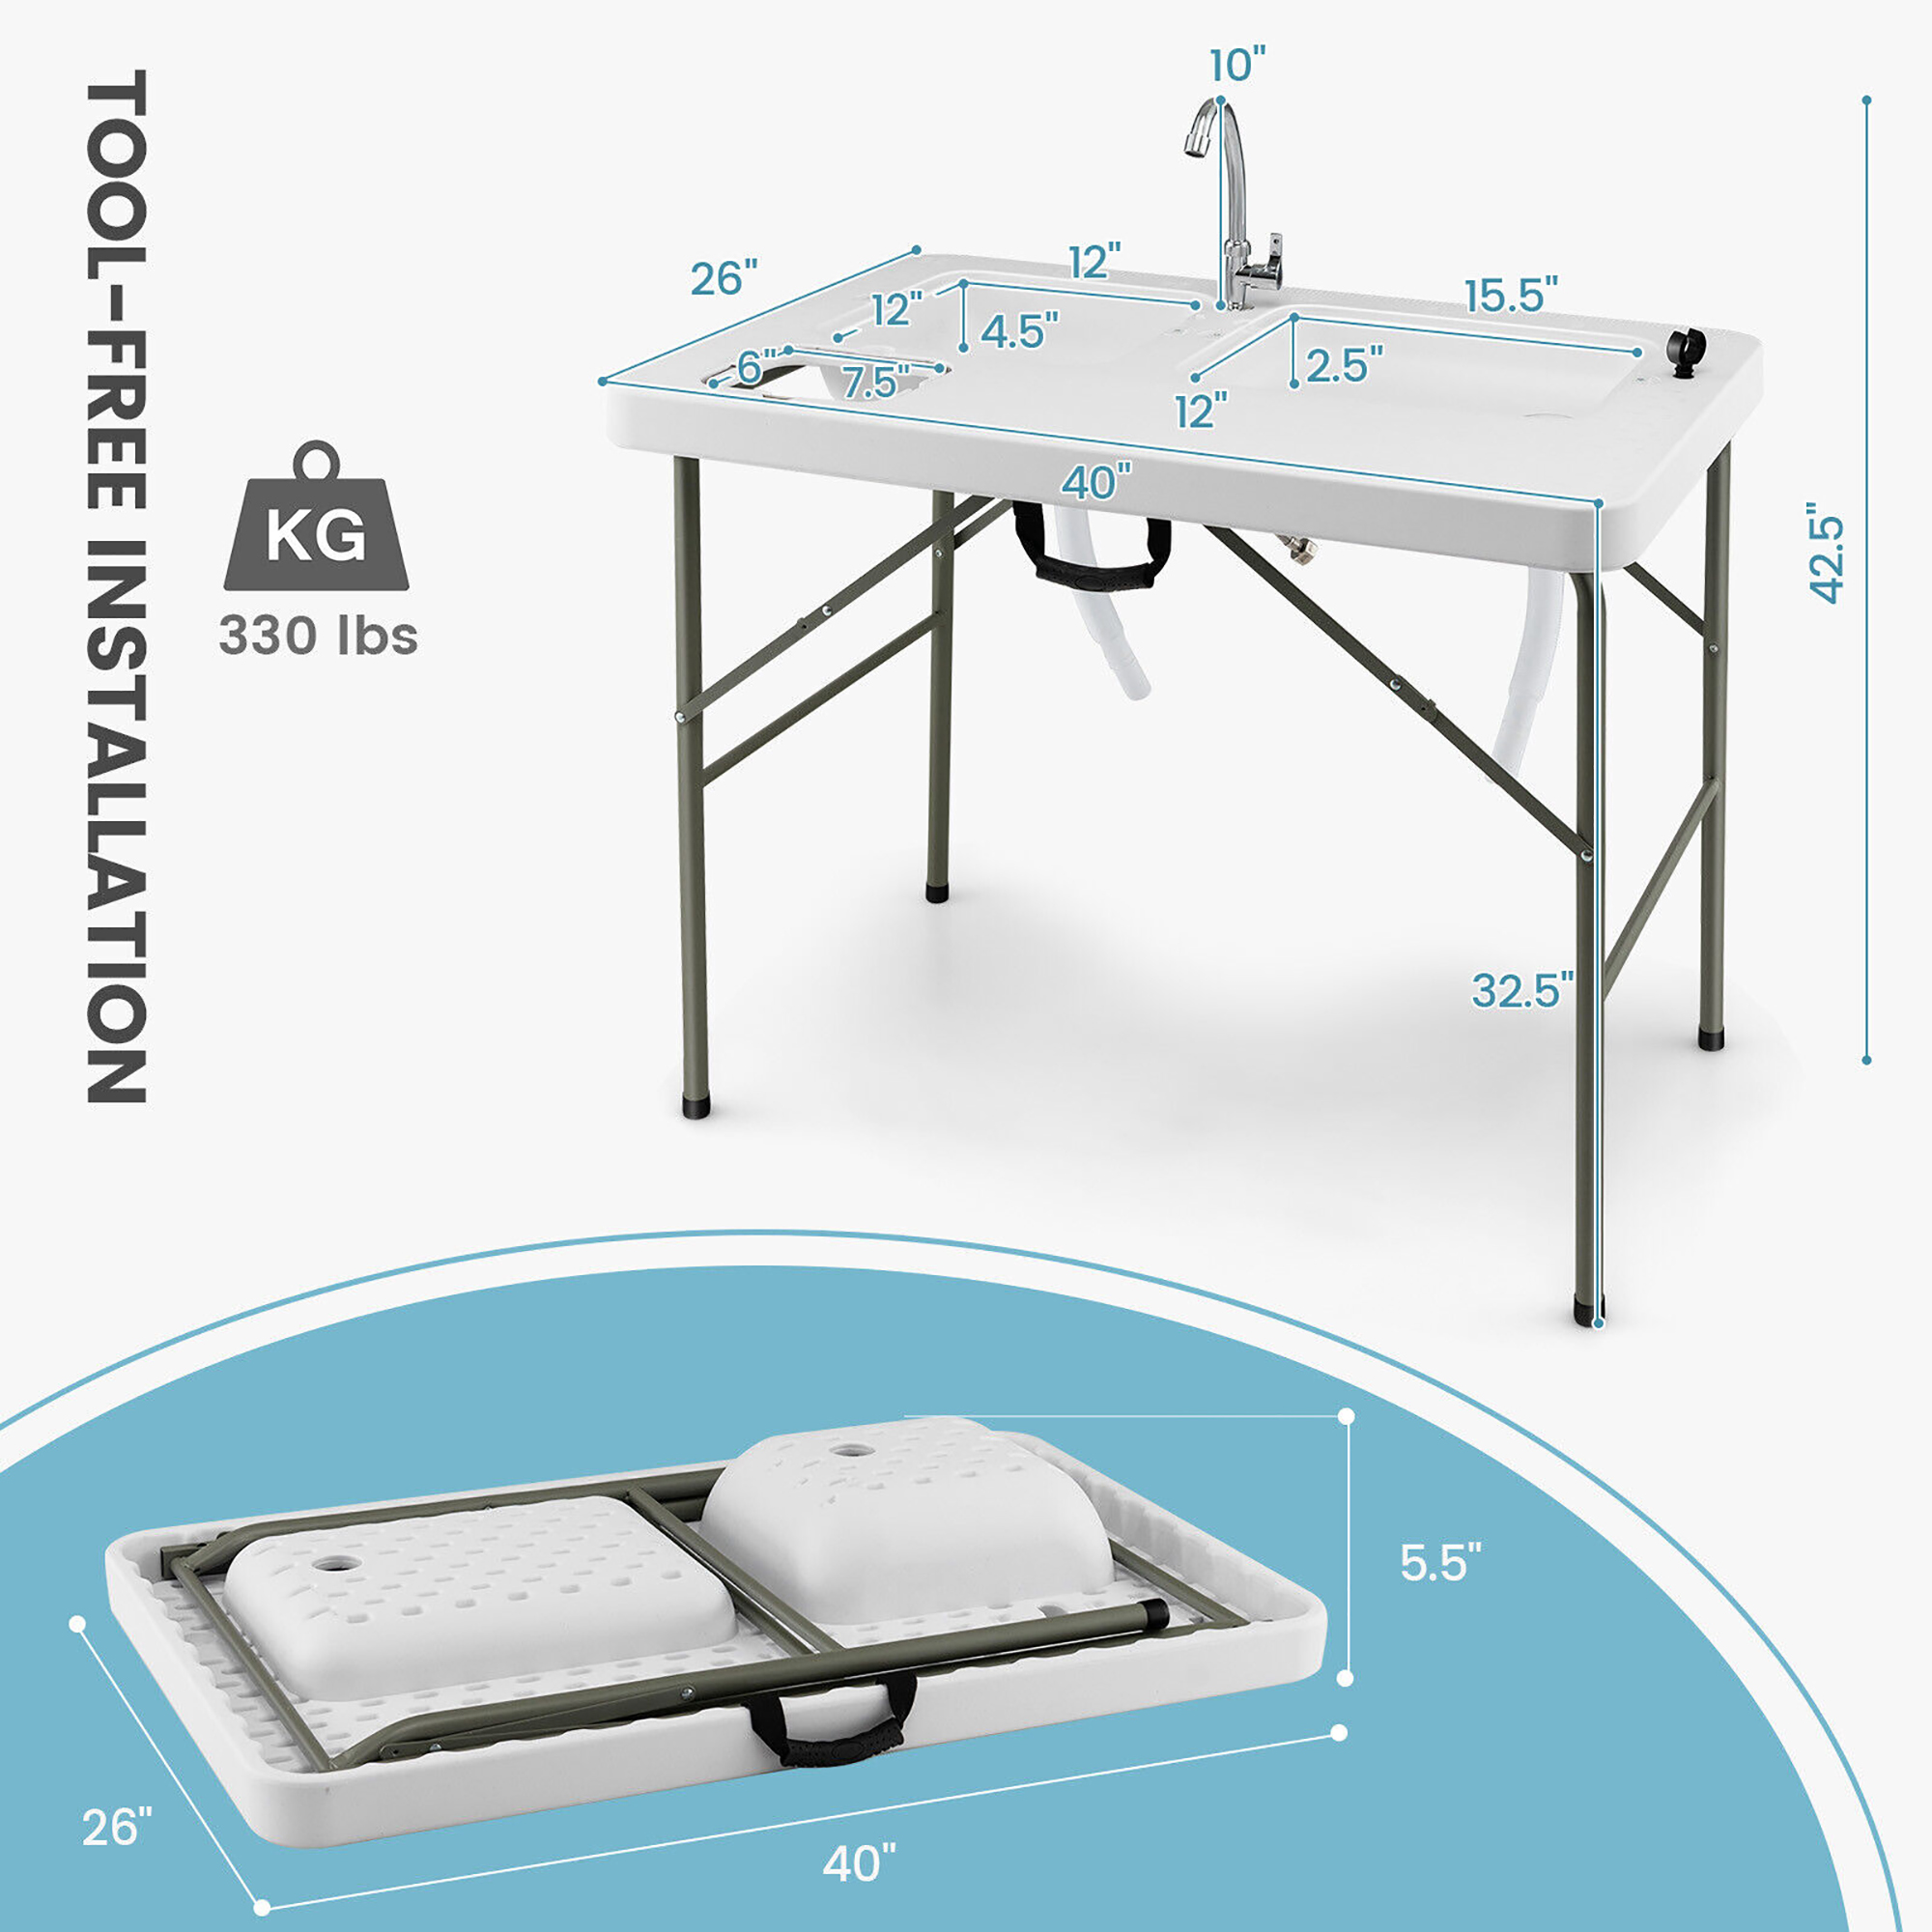 Gymax Folding Fish Cleaning Table w/ 2 Built-in Sinks & 360° Rotatable Faucet - image 2 of 9